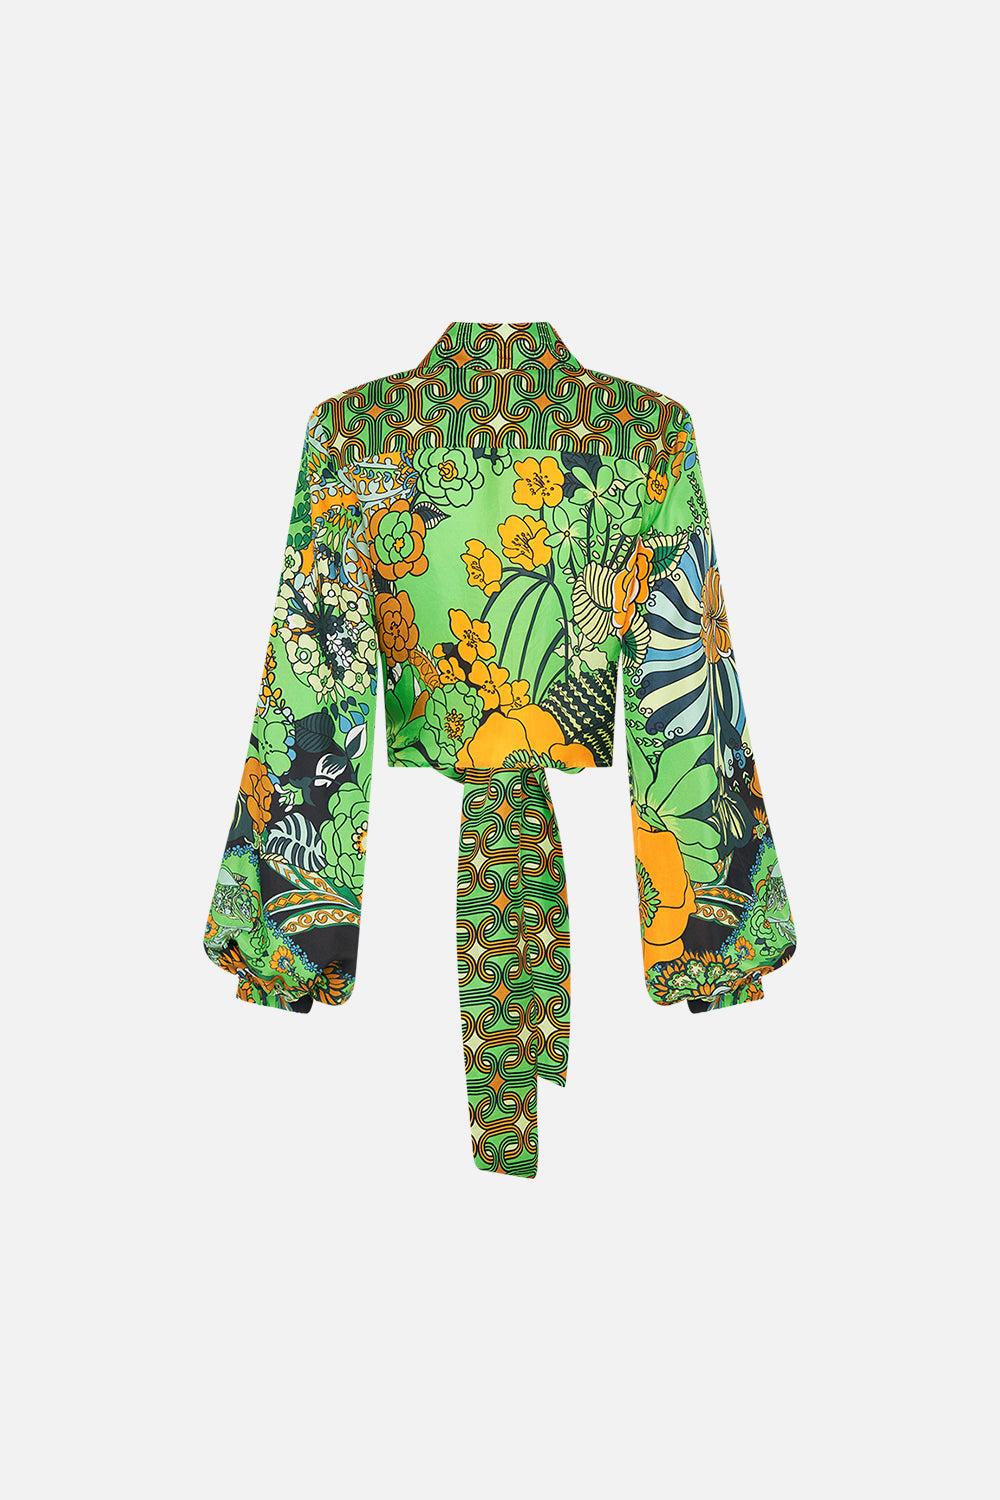 CAMILLA Green Cropped Wrap Shirt in Good Vibes Generation